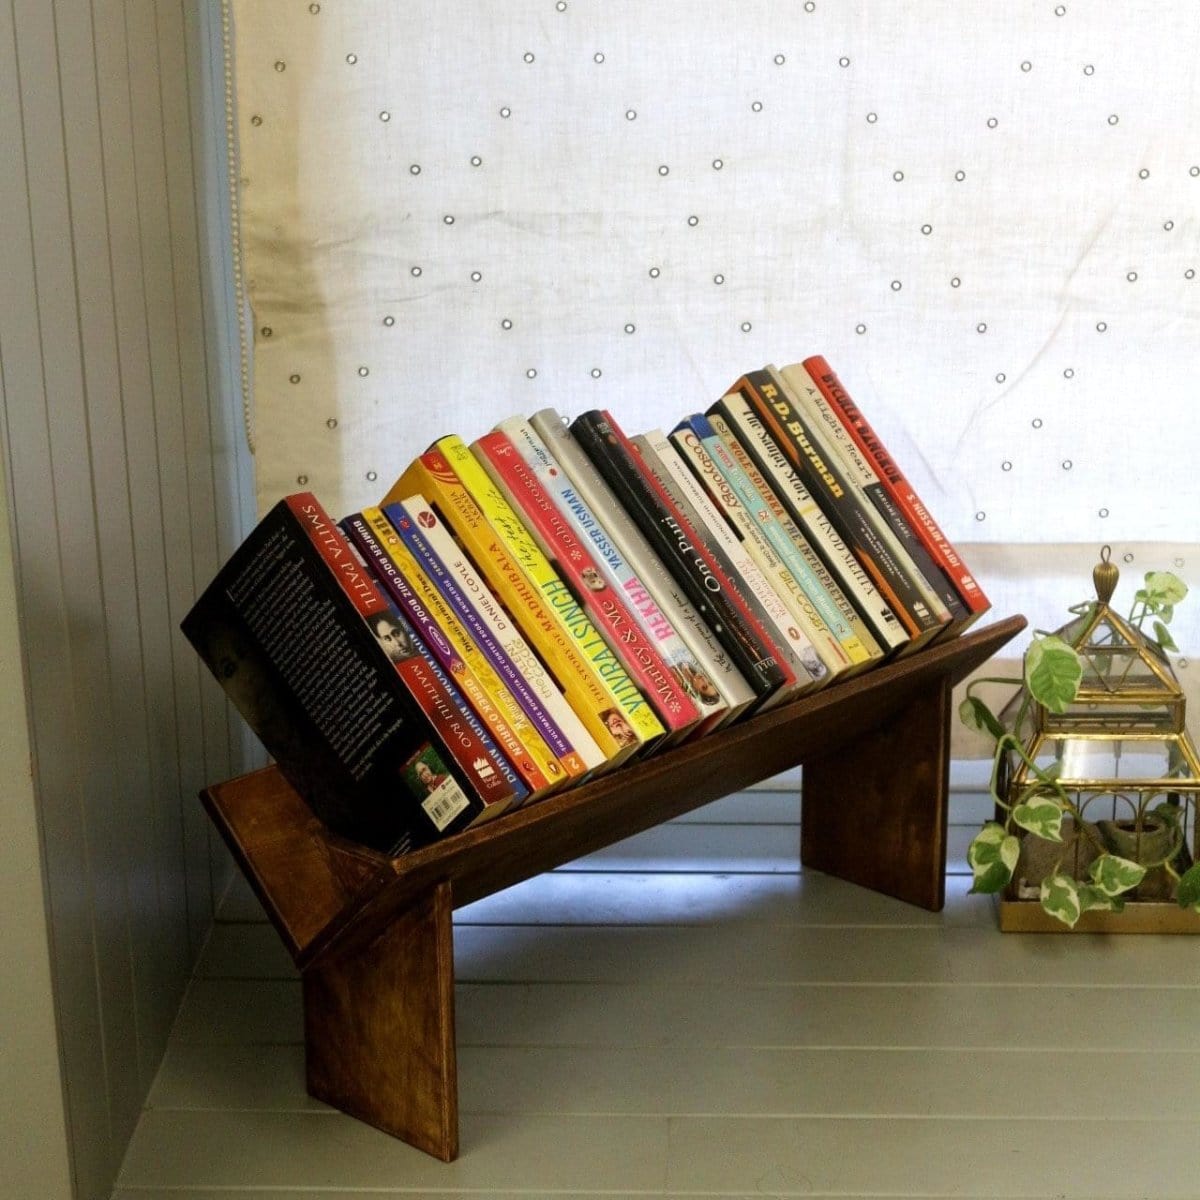 Barish Book Rack (Table Top) Walnut BH0016WT Best Home Decor Handcrafted